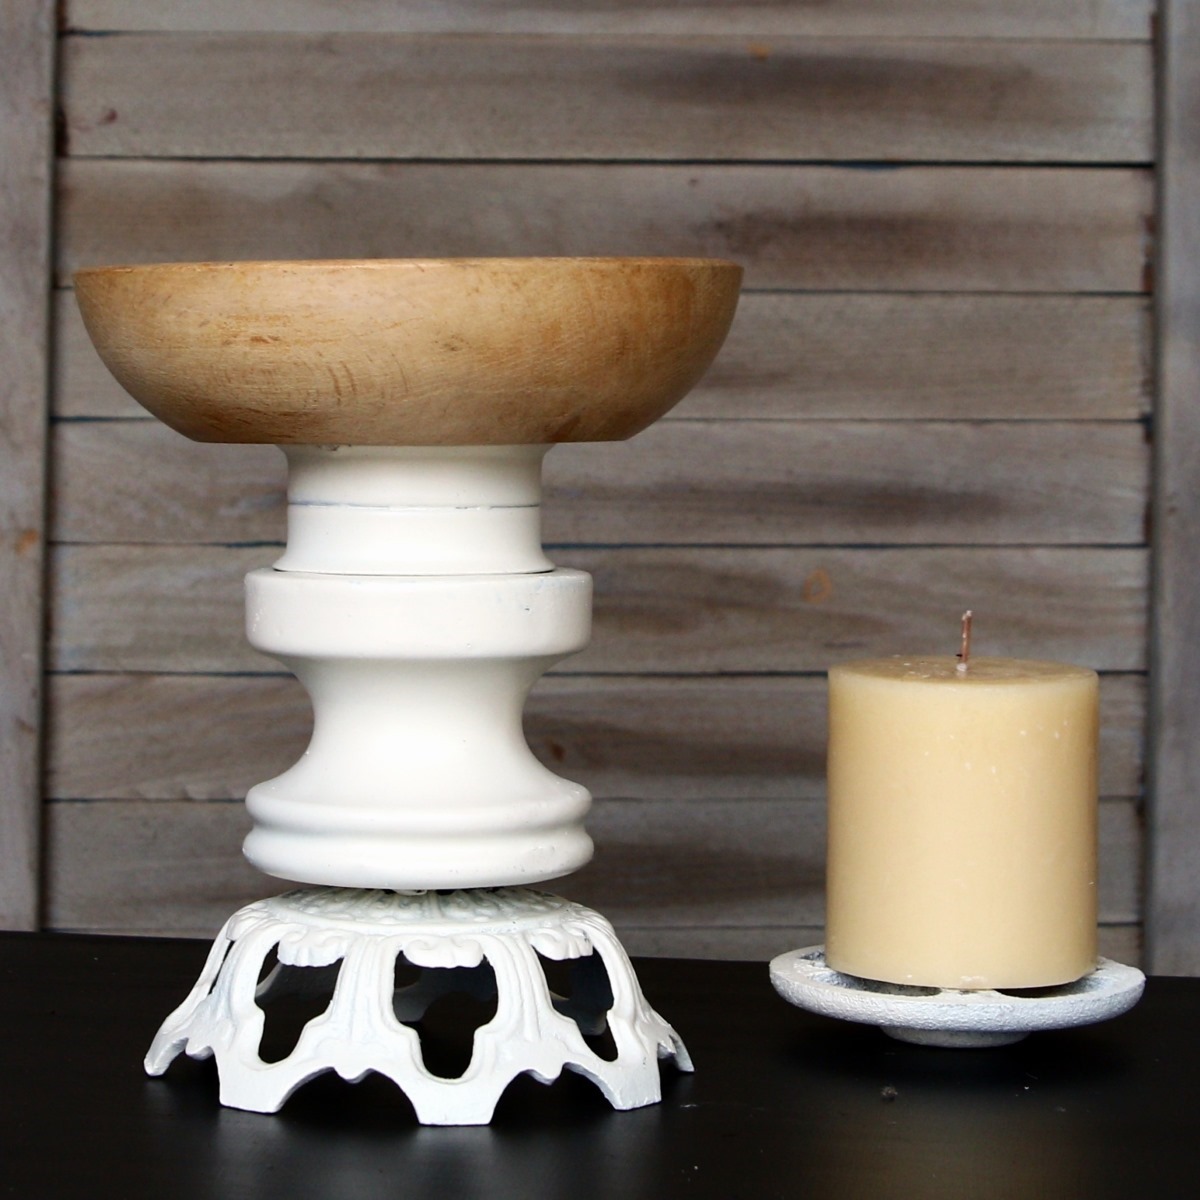 upcycled iron pieces transformed into a candleholder